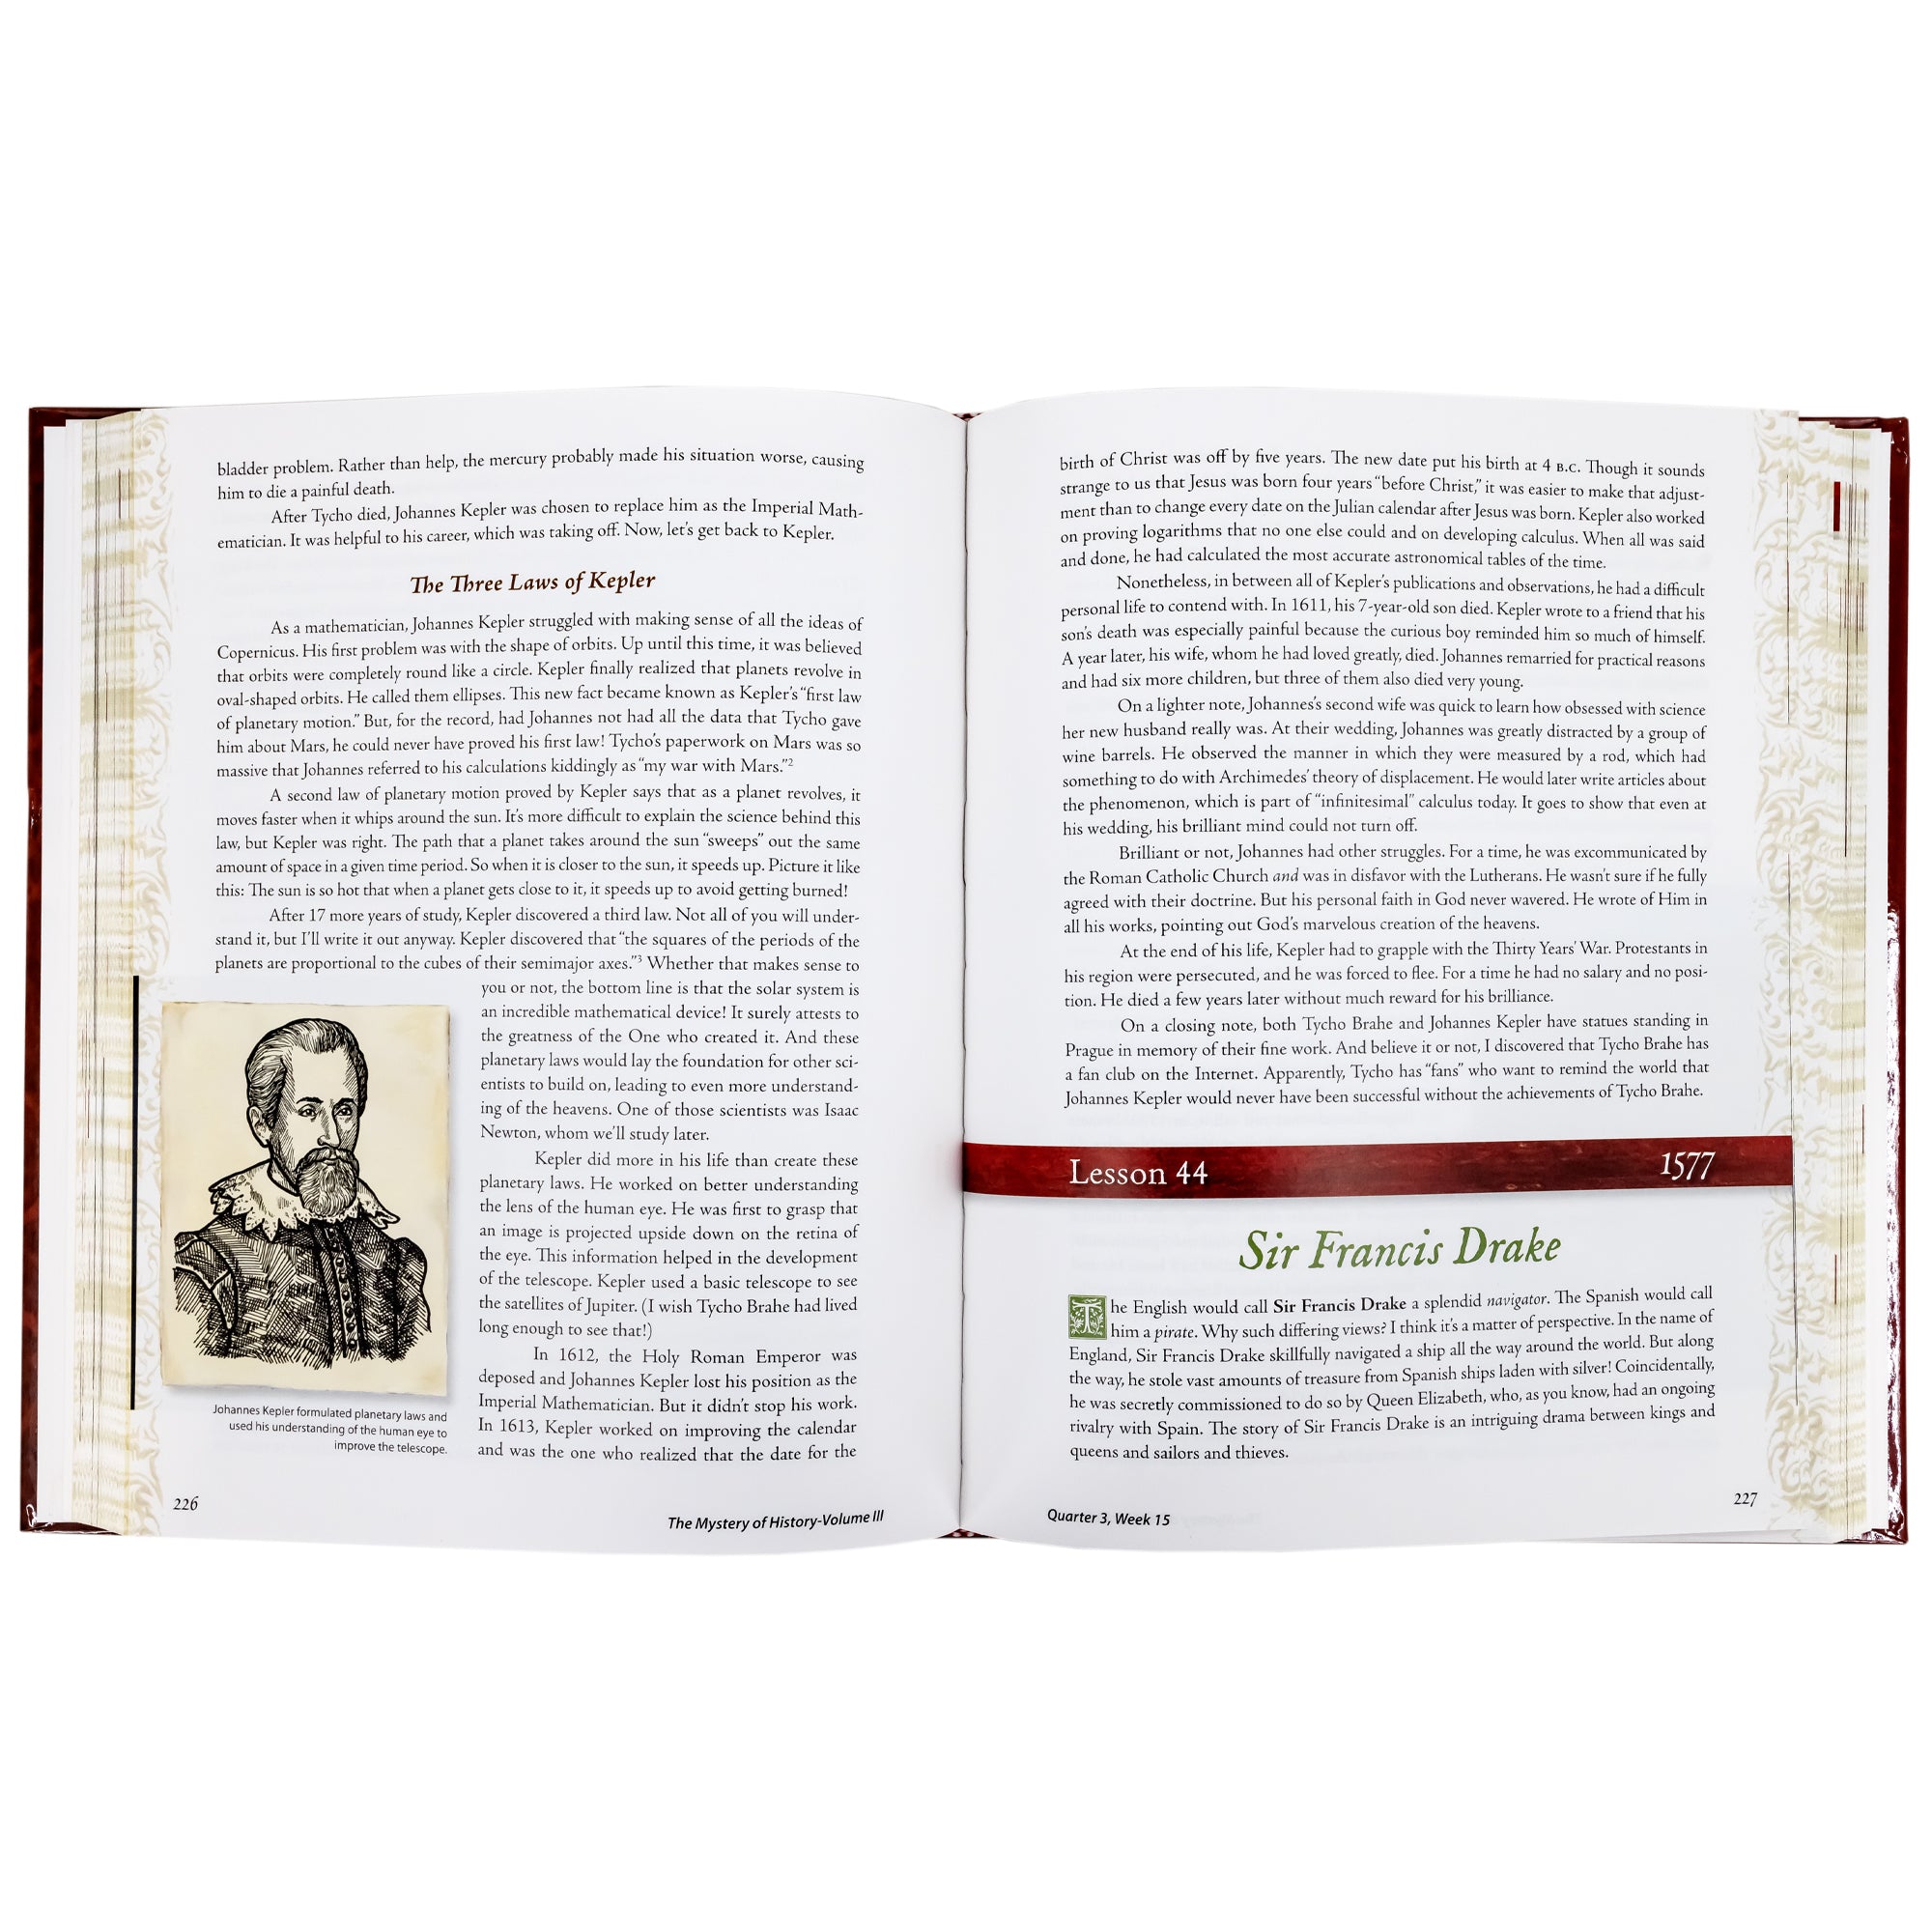 The Mystery of History volume 3 book opened. The pages are covered in text. There is an image of Johannes Kepler in the lower-left corner of the left page. On the right page, under paragraphs of text, there is a section titled “Lesson 44, 1577” and “Sir Francis Drake.”